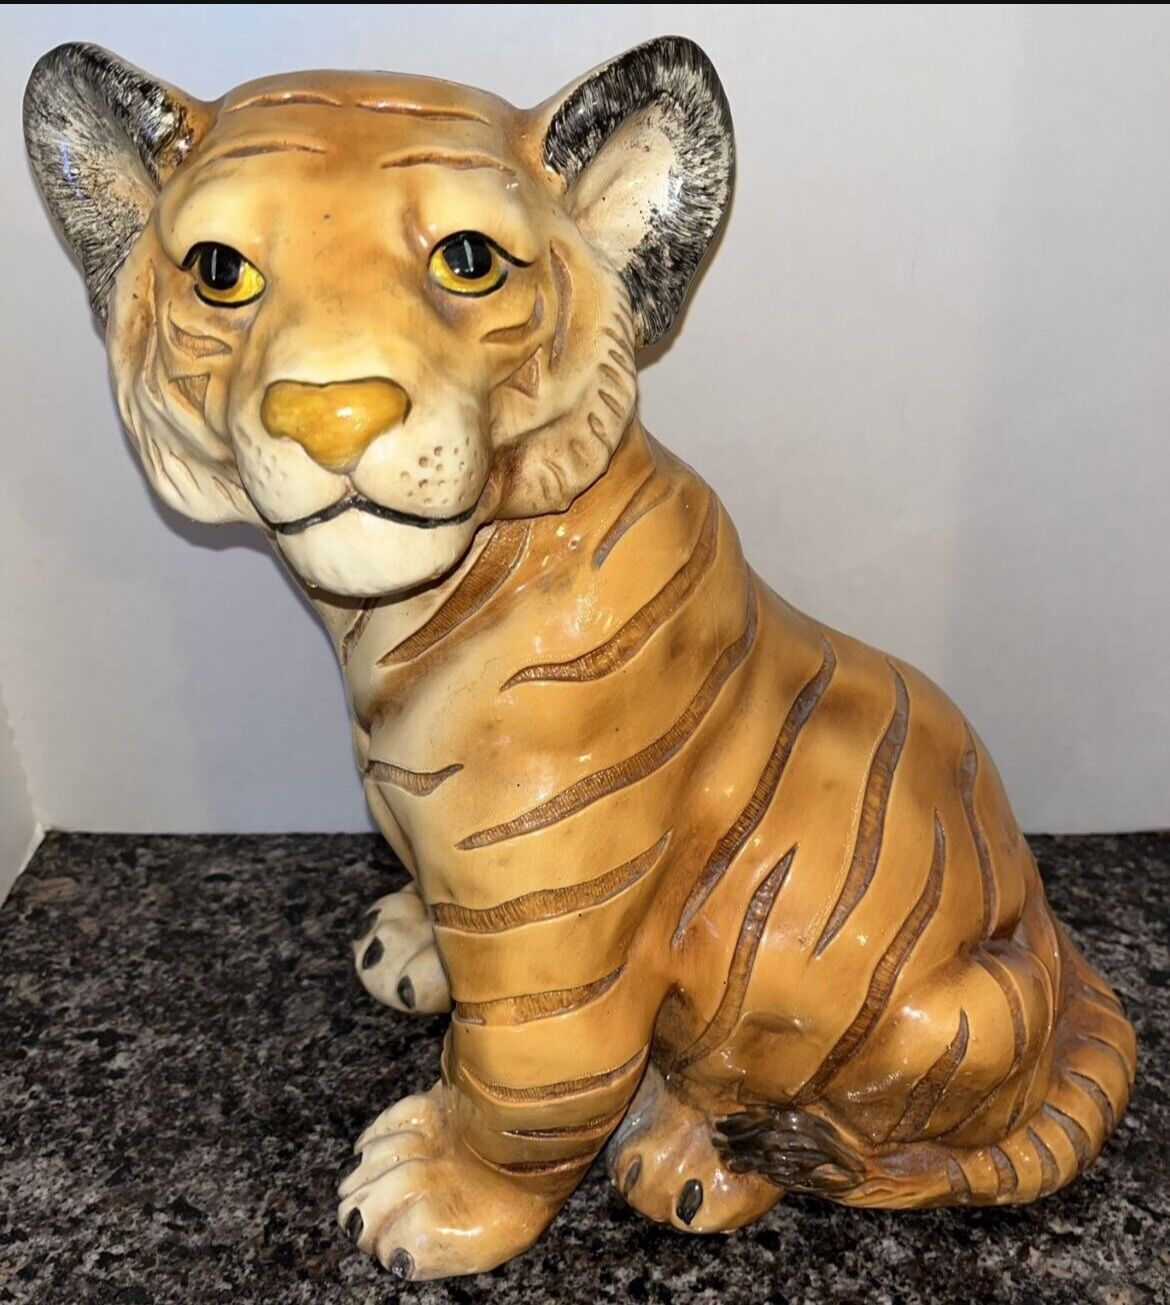 MARWAL Large Bengal Tiger Statue Sculpture Zoo Animal Decor 14” Tall